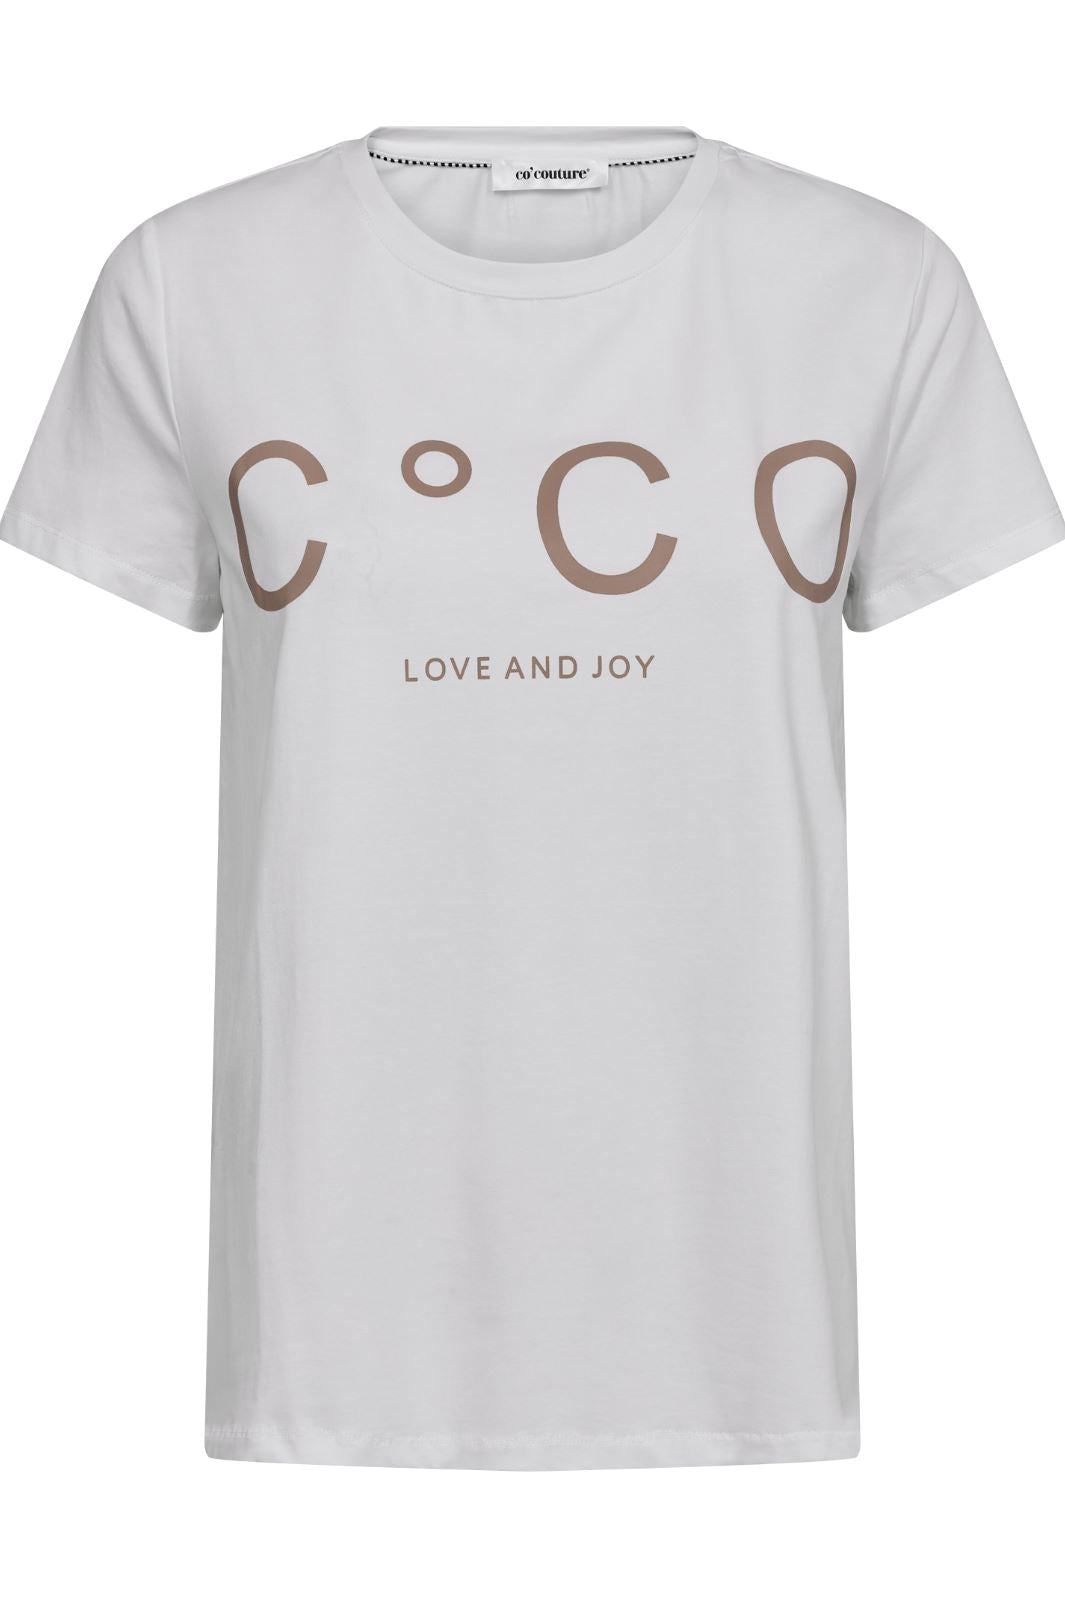 Co´couture - Coco Signature Tee - 40154 Whitewalnu T-shirts 